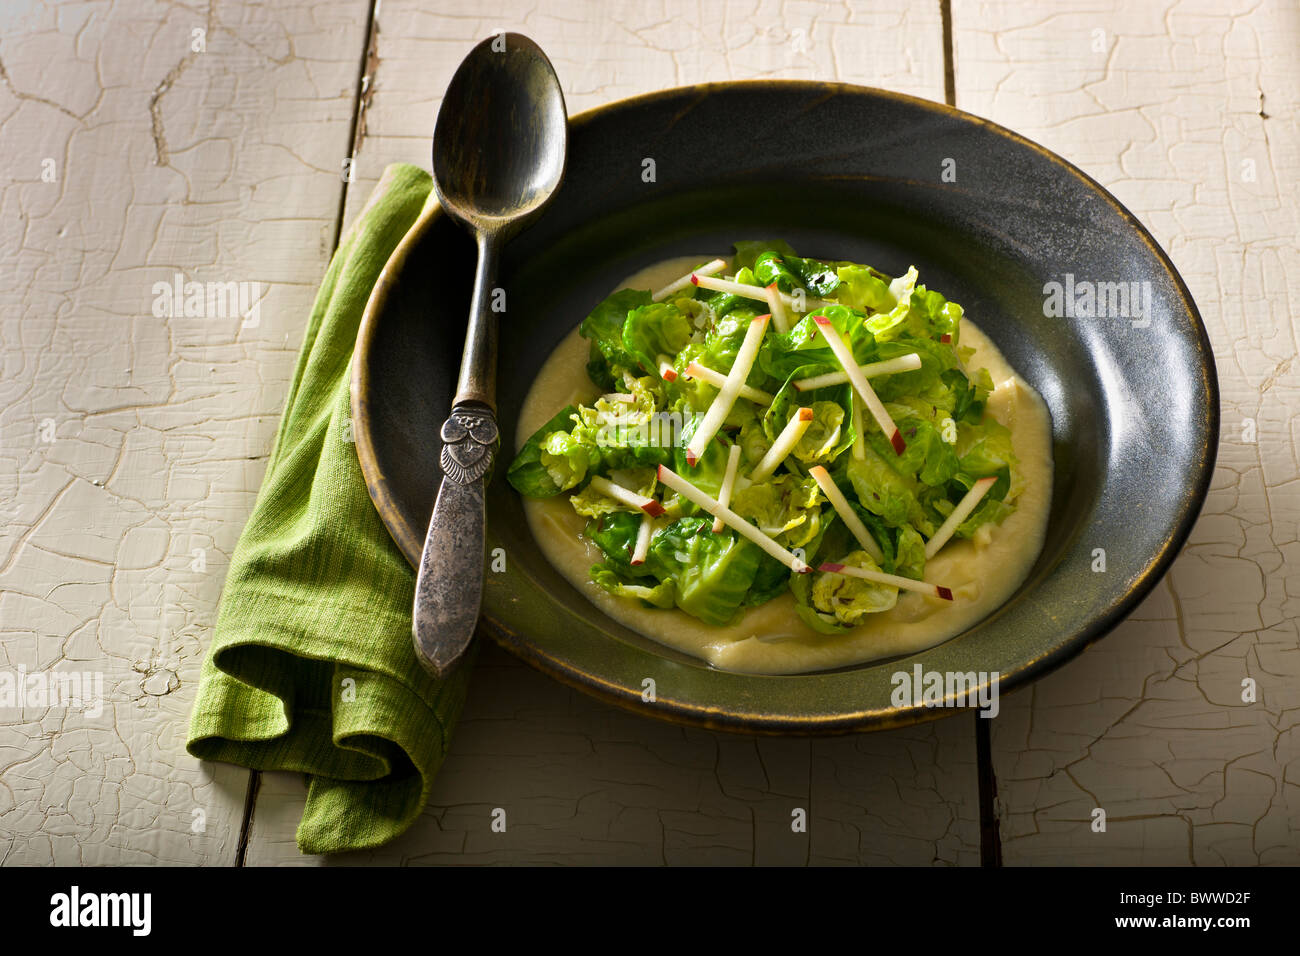 Sautéed Brussel Sprouts leaves with Apple-Mustrad sauce. Stock Photo